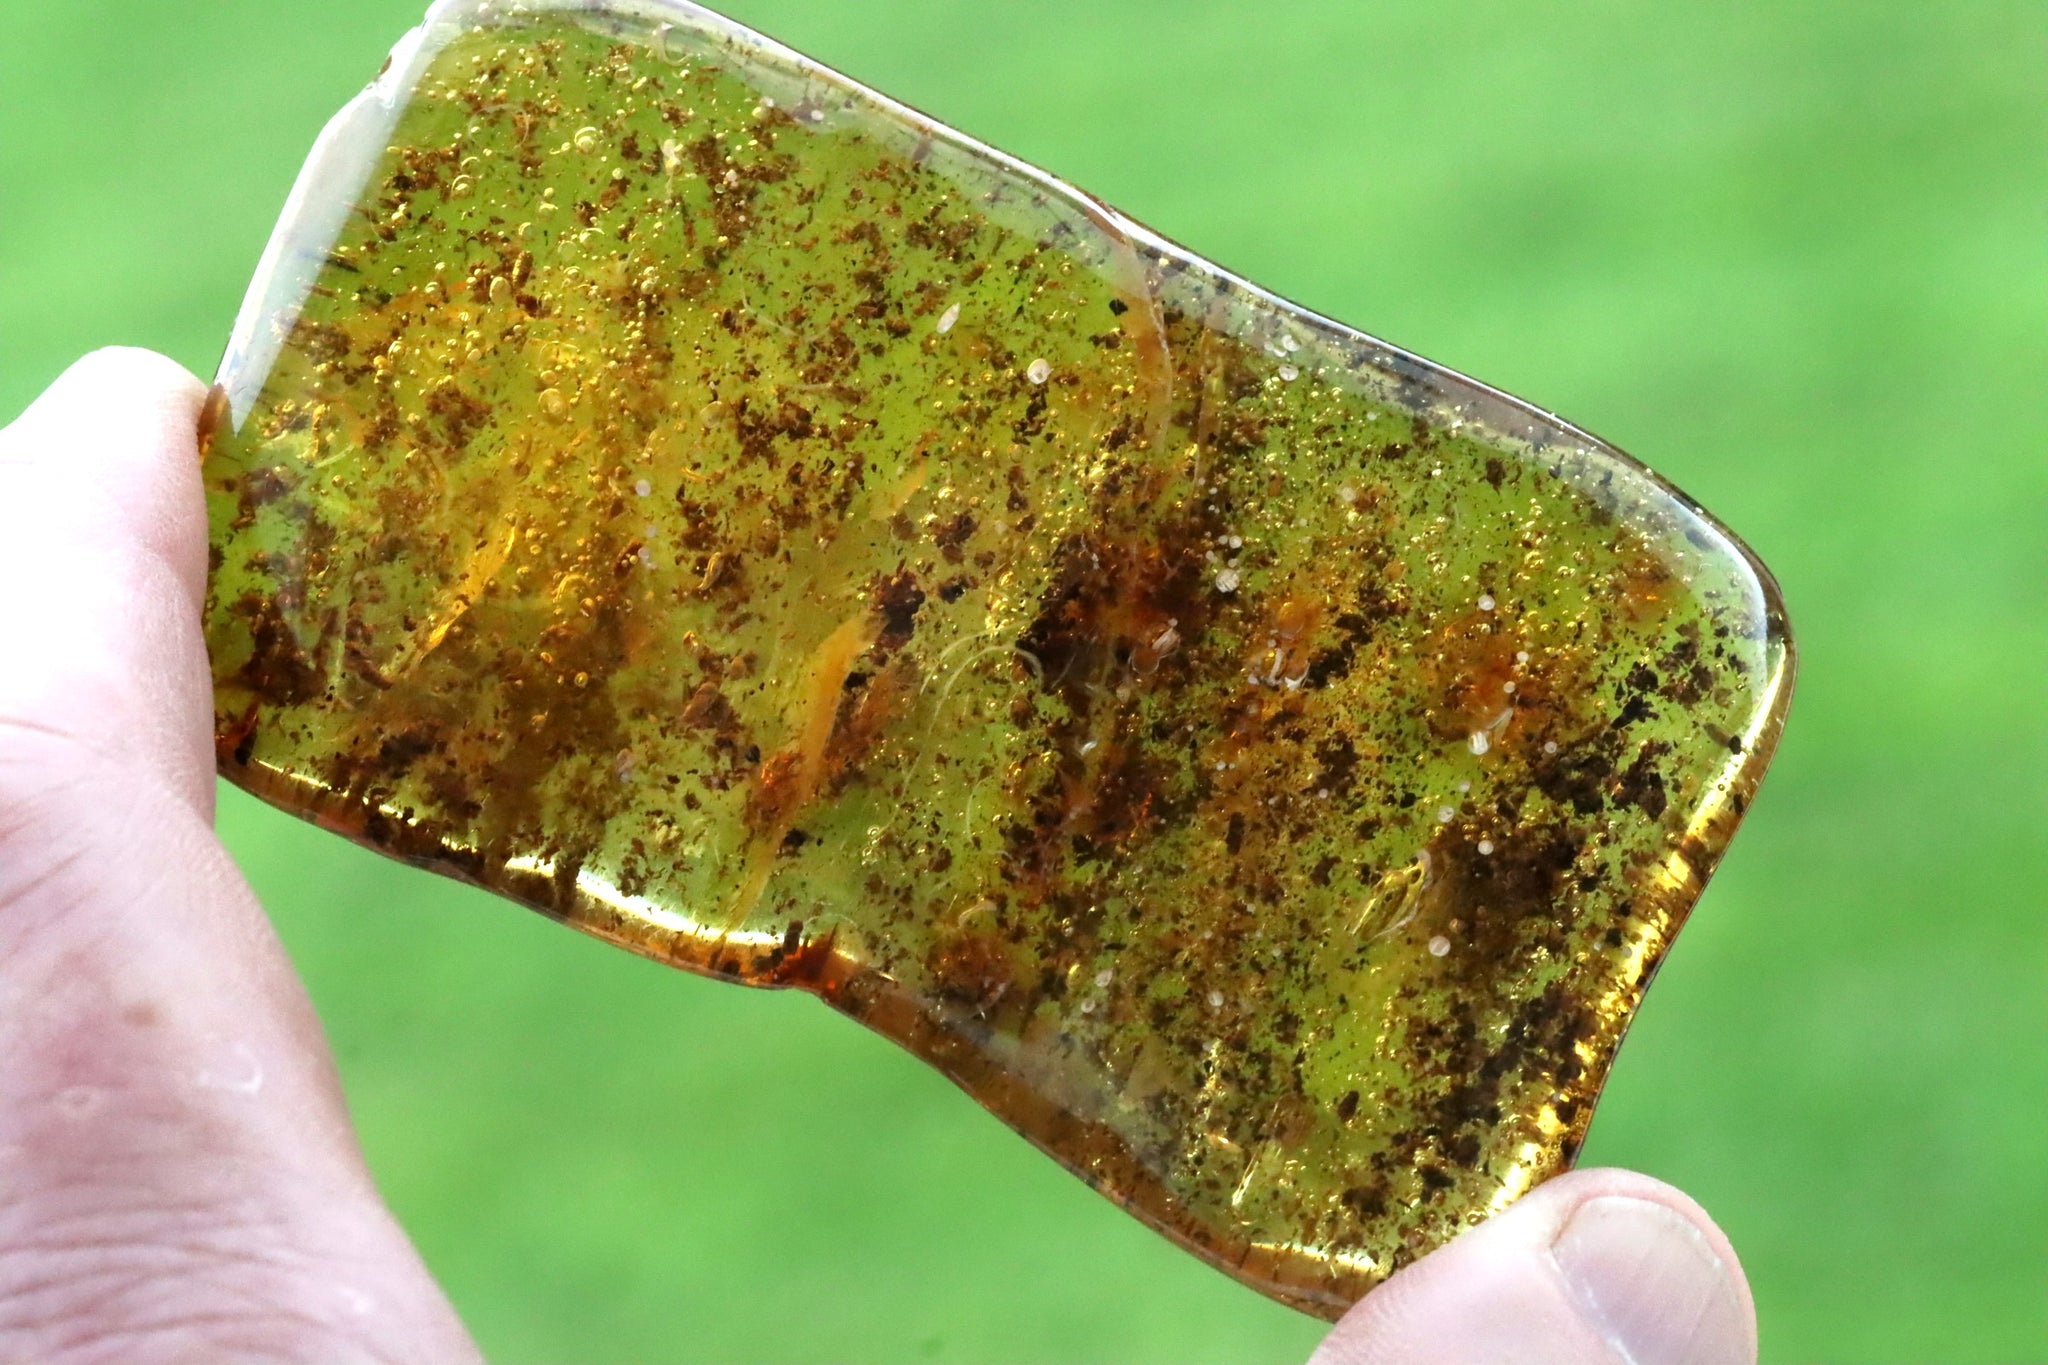 Smooth Baltic Amber Gemstone with 1000s Of Air Bubbles